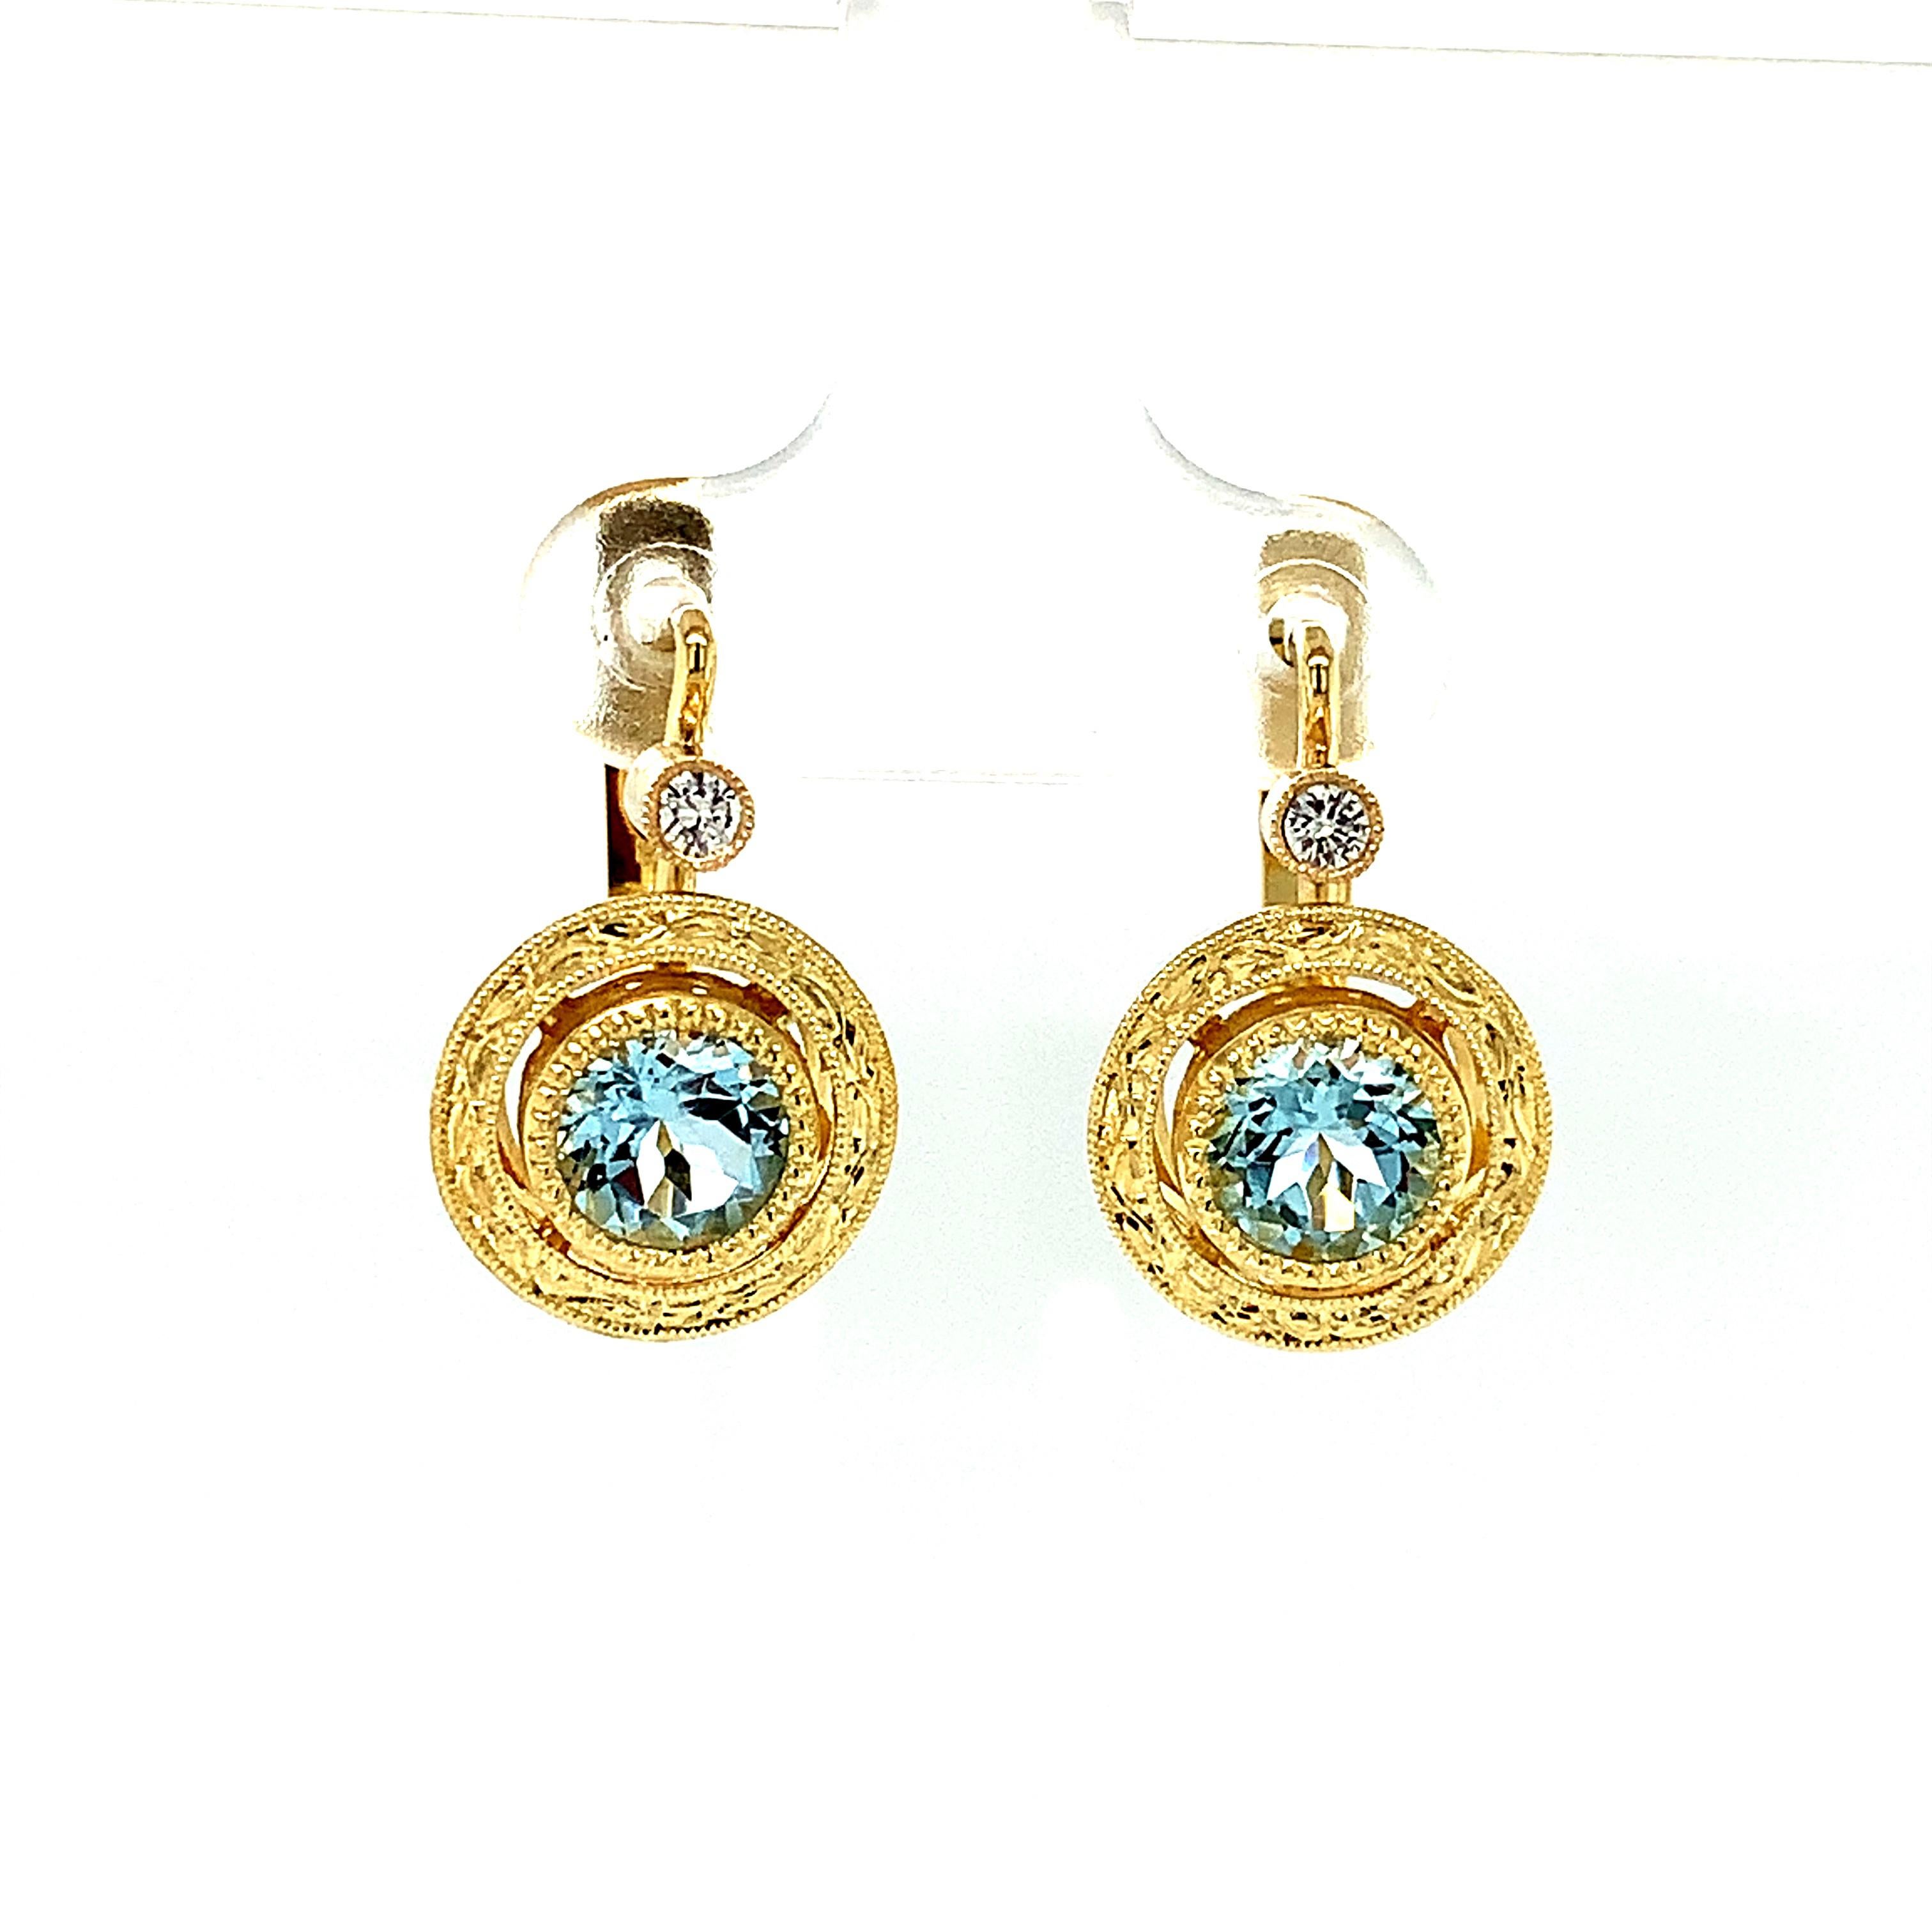 These intricately handmade drop earrings feature sparkling round aquamarines set in 18k yellow gold! The sky blue crystalline gems would light up anyone's day, especially if you are an Aquarian born in March! Beautifully set in finely engraved 18k